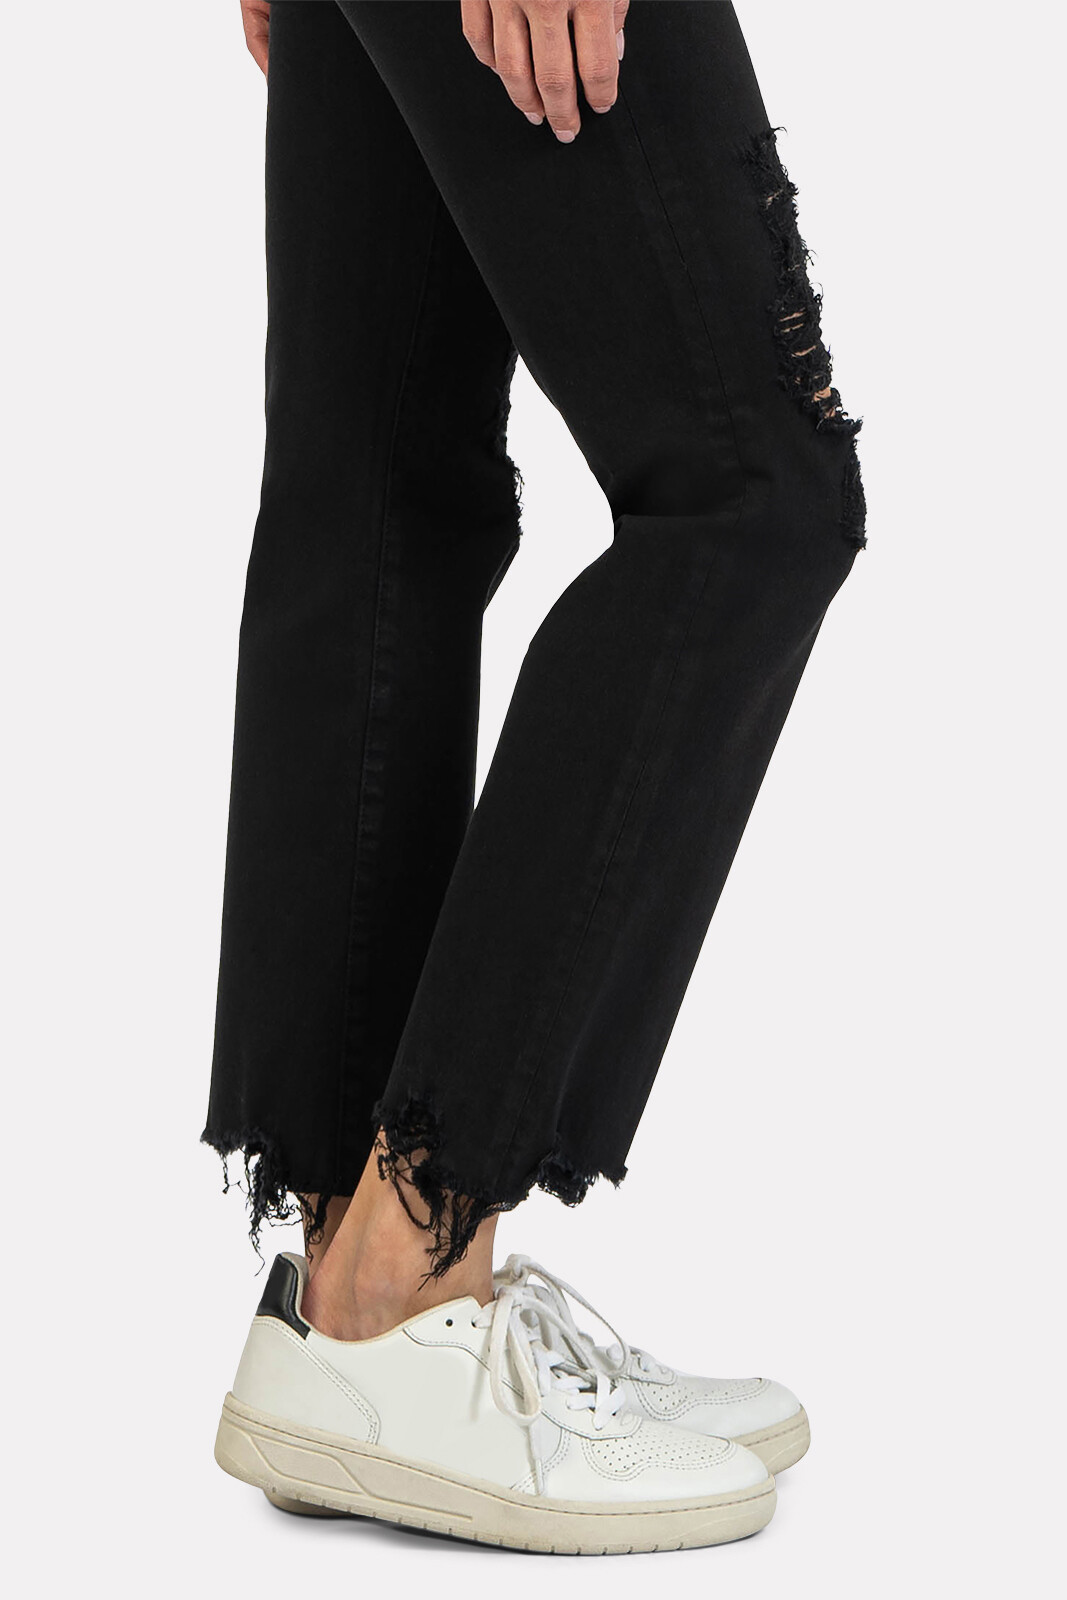 Reese High Rise Fab Ab Exposed Button Raw Hem Jean